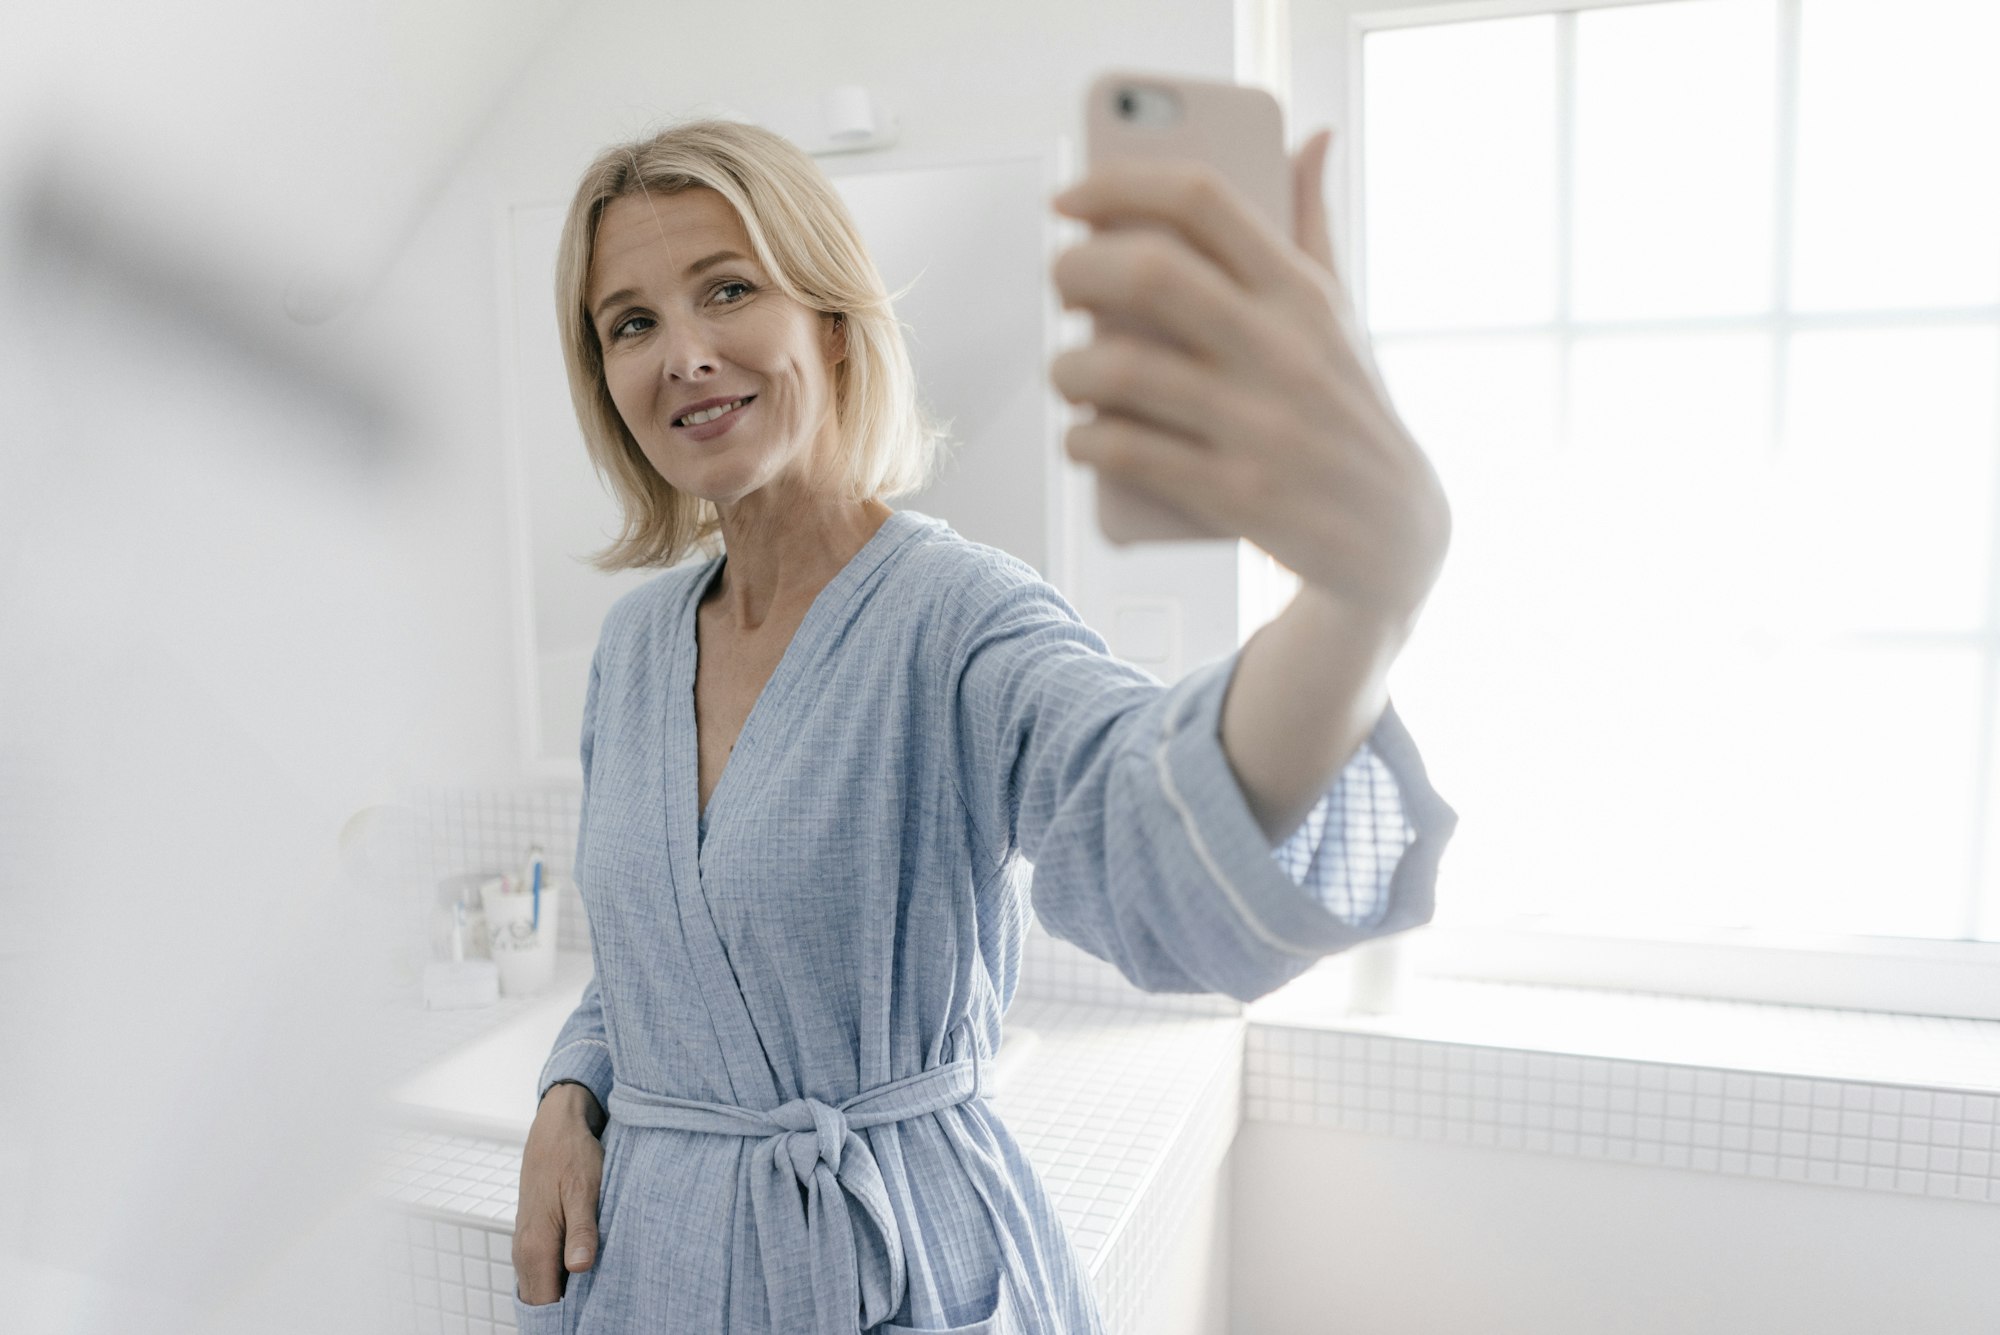 Smiling mature woman taking a selfie in bathroom